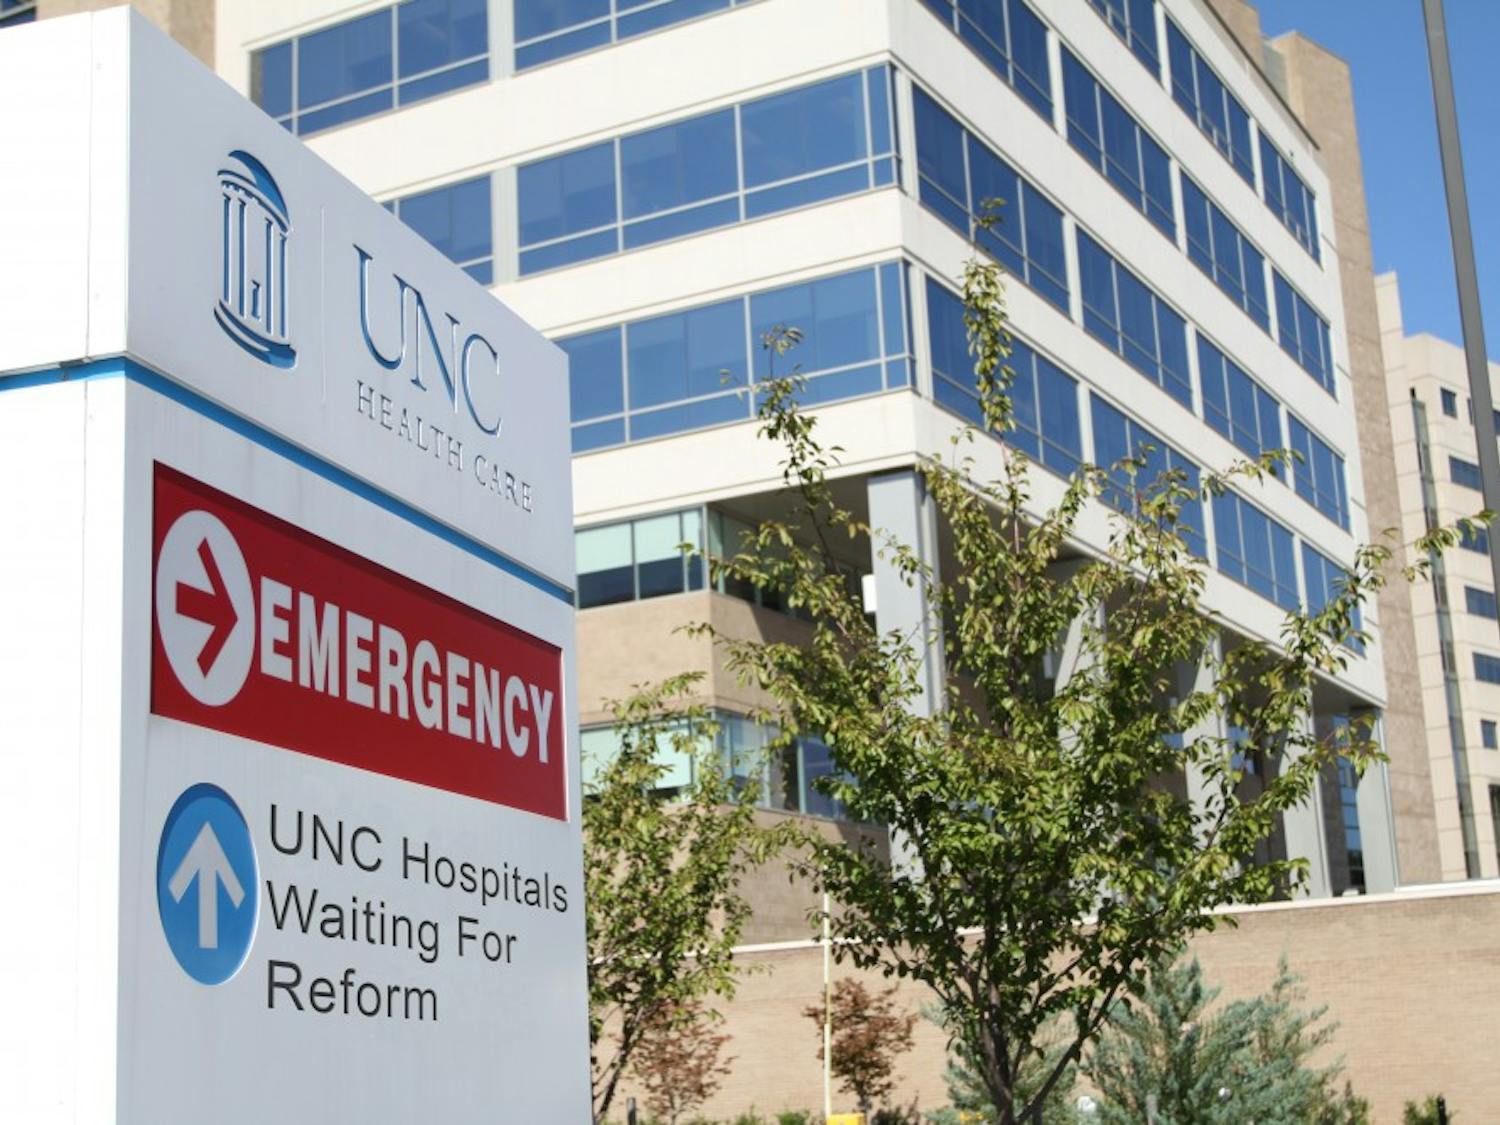 UNC Hospitals, seen here from the corner of Manning Drive and Emergency Room Drive, awaits health care reform to make up for significant monetary losses in recent years.